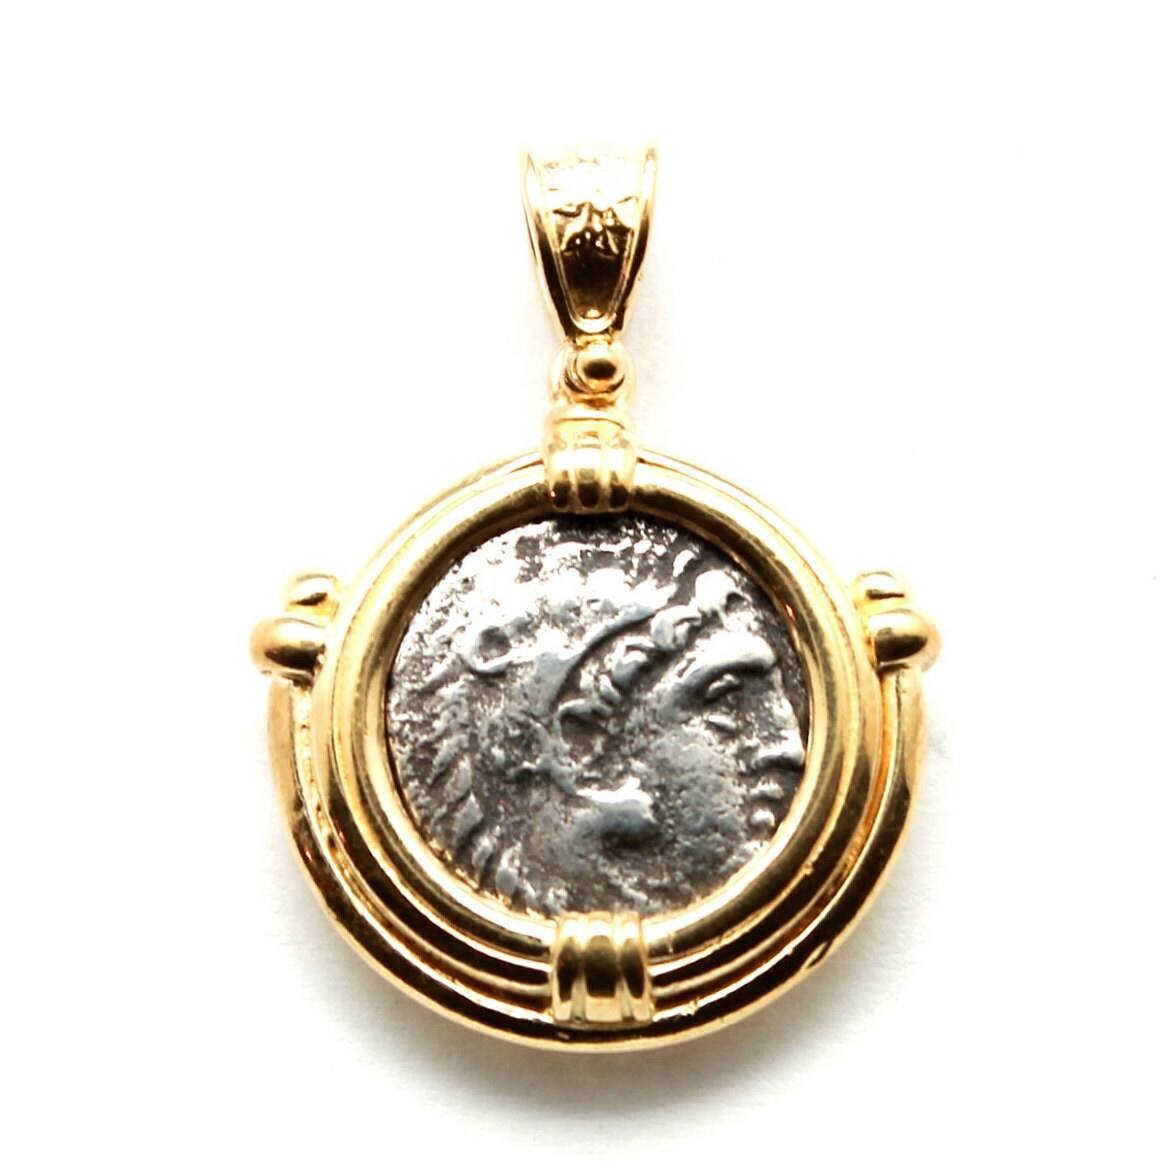 18K Gold Plating, Sterling Silver Pendant, Alexander the Great, Heracles/Zeus, Ancient Greek Drachm Coin, ID13649